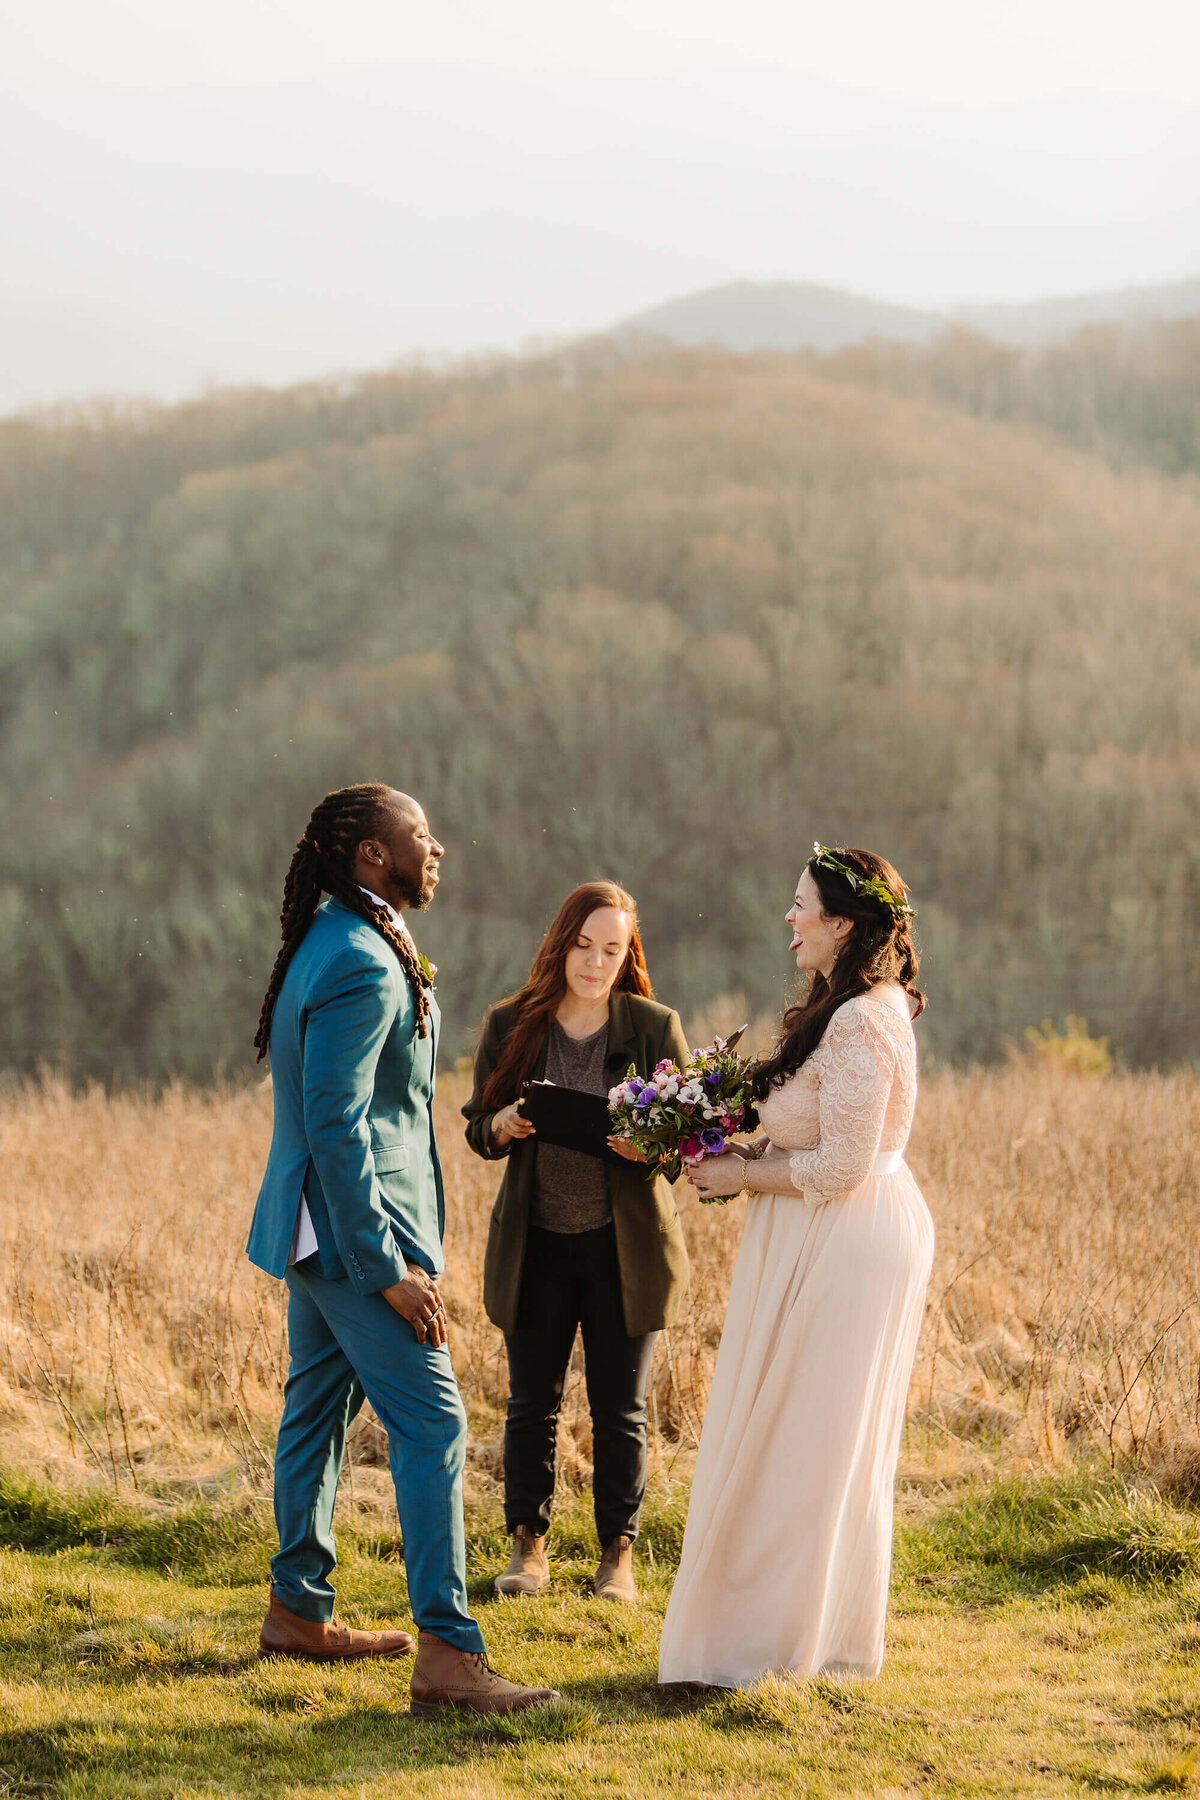 Max-Patch-Sunset-Mountain-Elopement-19